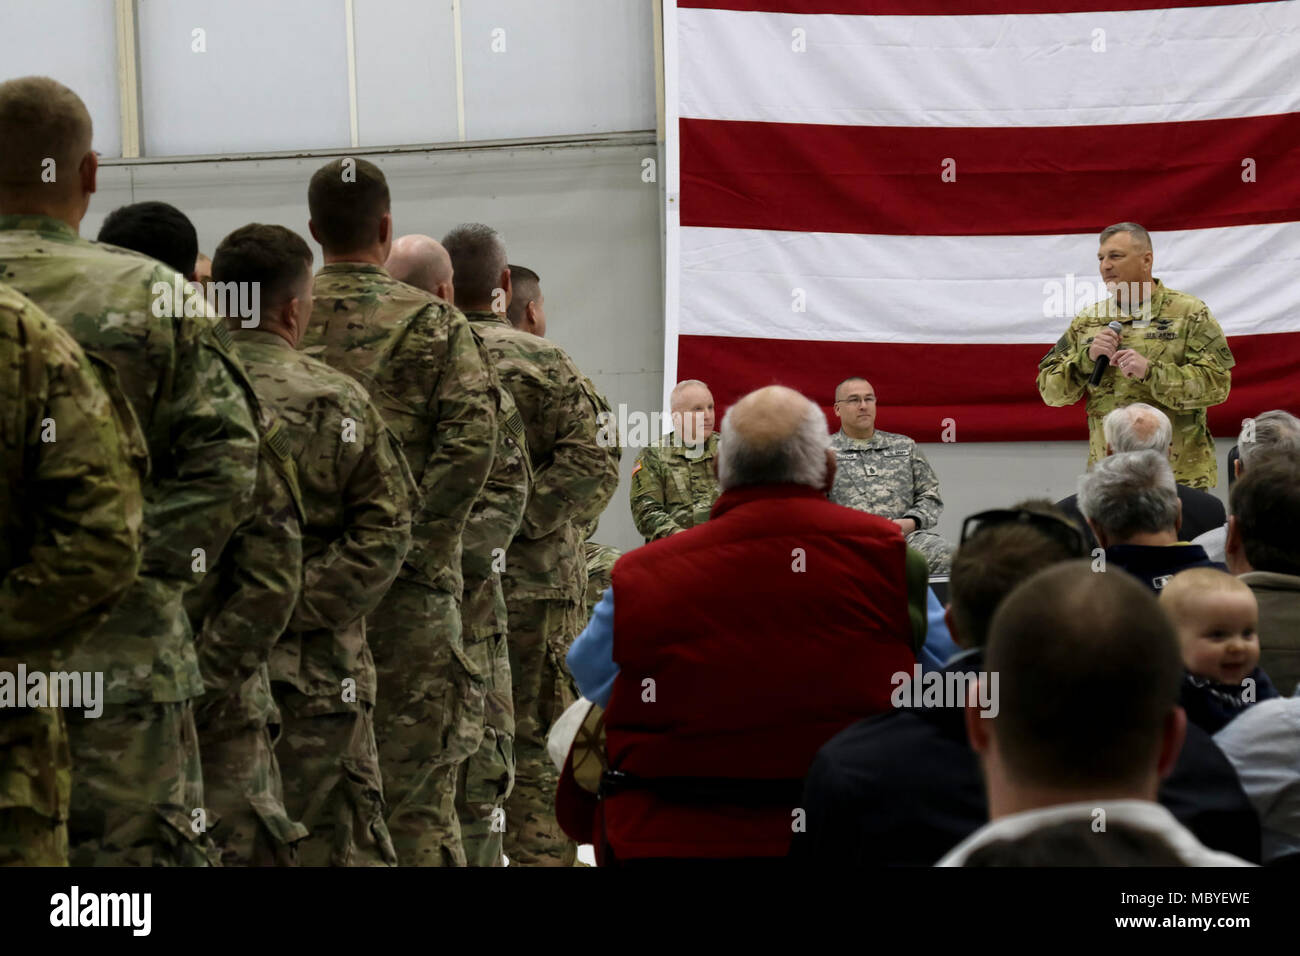 Maj. Gen. Mark Anderson, Wisconsin’s deputy adjutant general for Army, speaks during a welcome-home ceremony Jan. 25 for approximately 75 Wisconsin members of the 1st Battalion, 147th Aviation returning to Madison, Wis., after a nine-month Middle East deployment. The unit provided UH-60M Black Hawk helicopter airlift assets and maintenance support personnel, flew 3,700 mission hours, conducted 69 medical evacuations, and transported more than 5,900 troops as well as approximately 200,000 pounds of cargo. Wisconsin National Guard Stock Photo